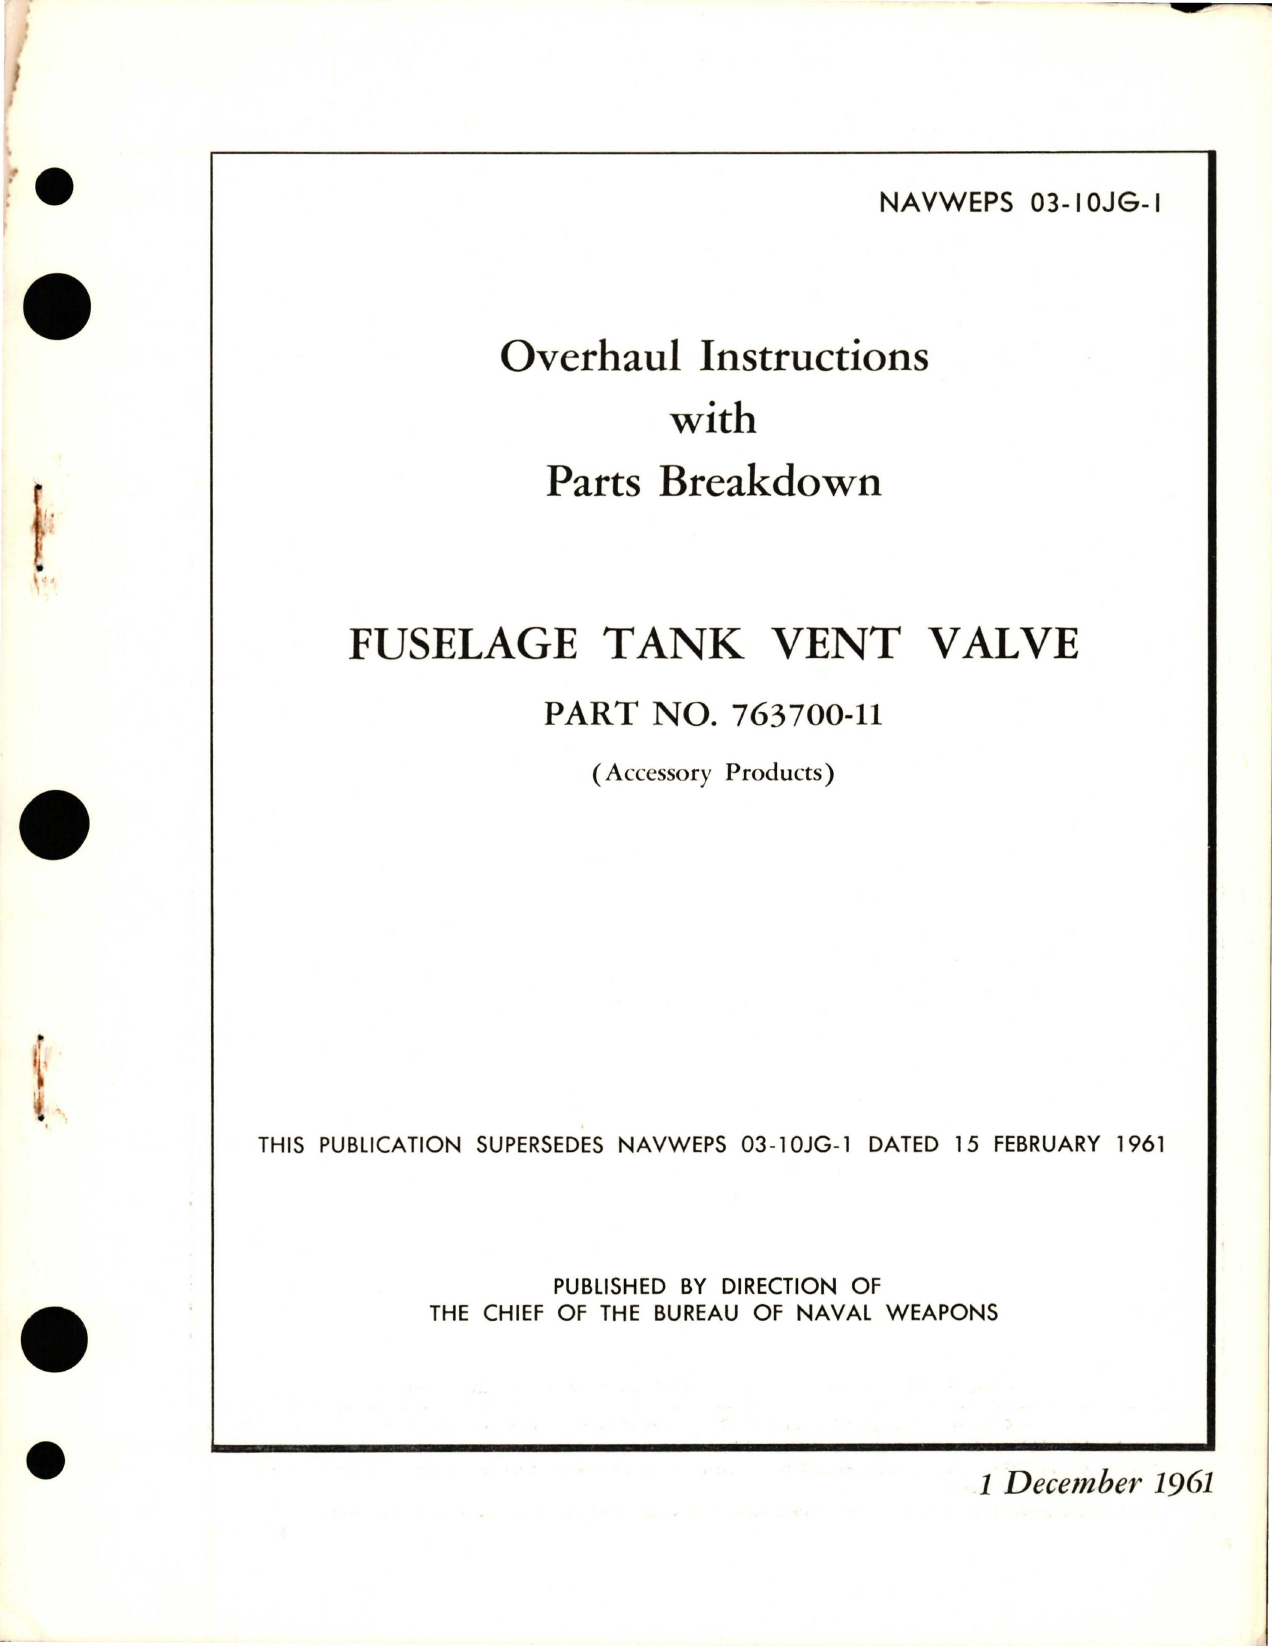 Sample page 1 from AirCorps Library document: Overhaul Instructions with Parts Breakdown for Fuselage Tank Vent Valve m- Part 763700-11